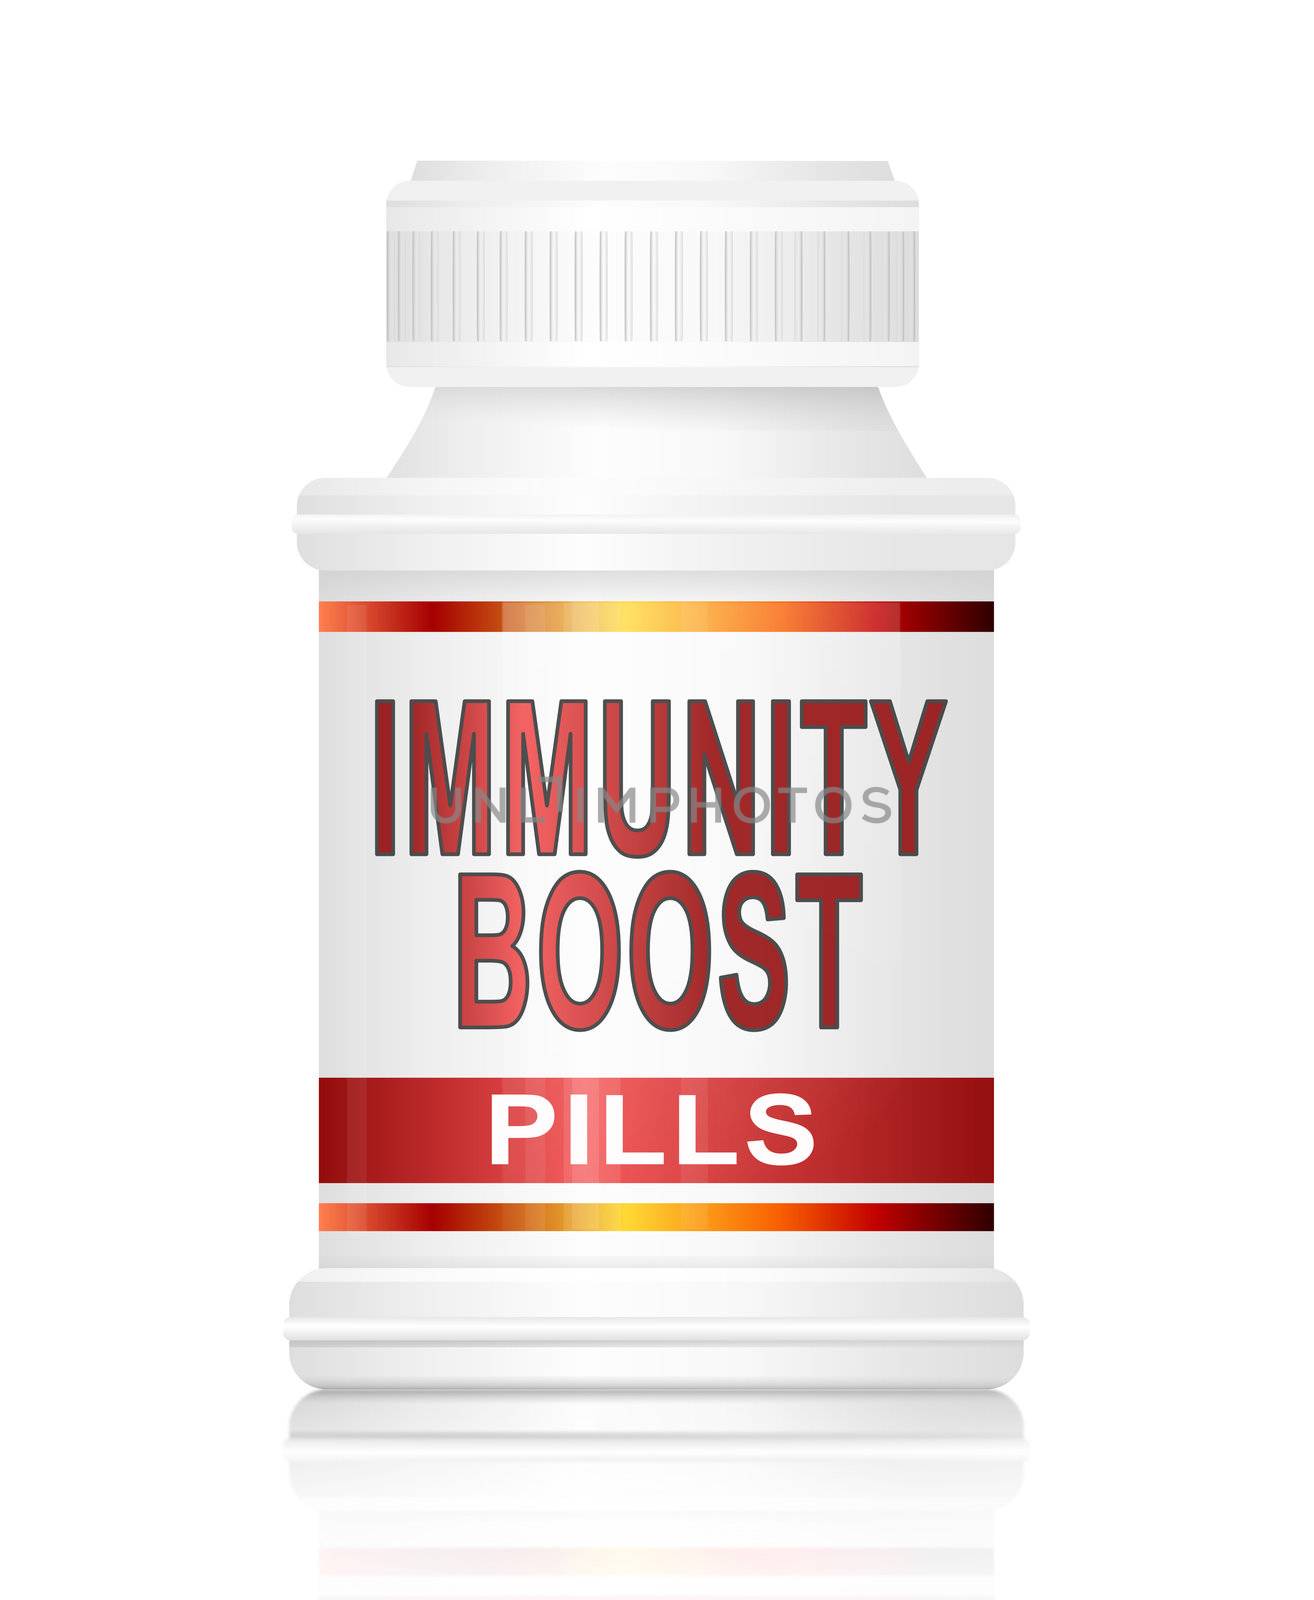 Immunity boost concept. by 72soul